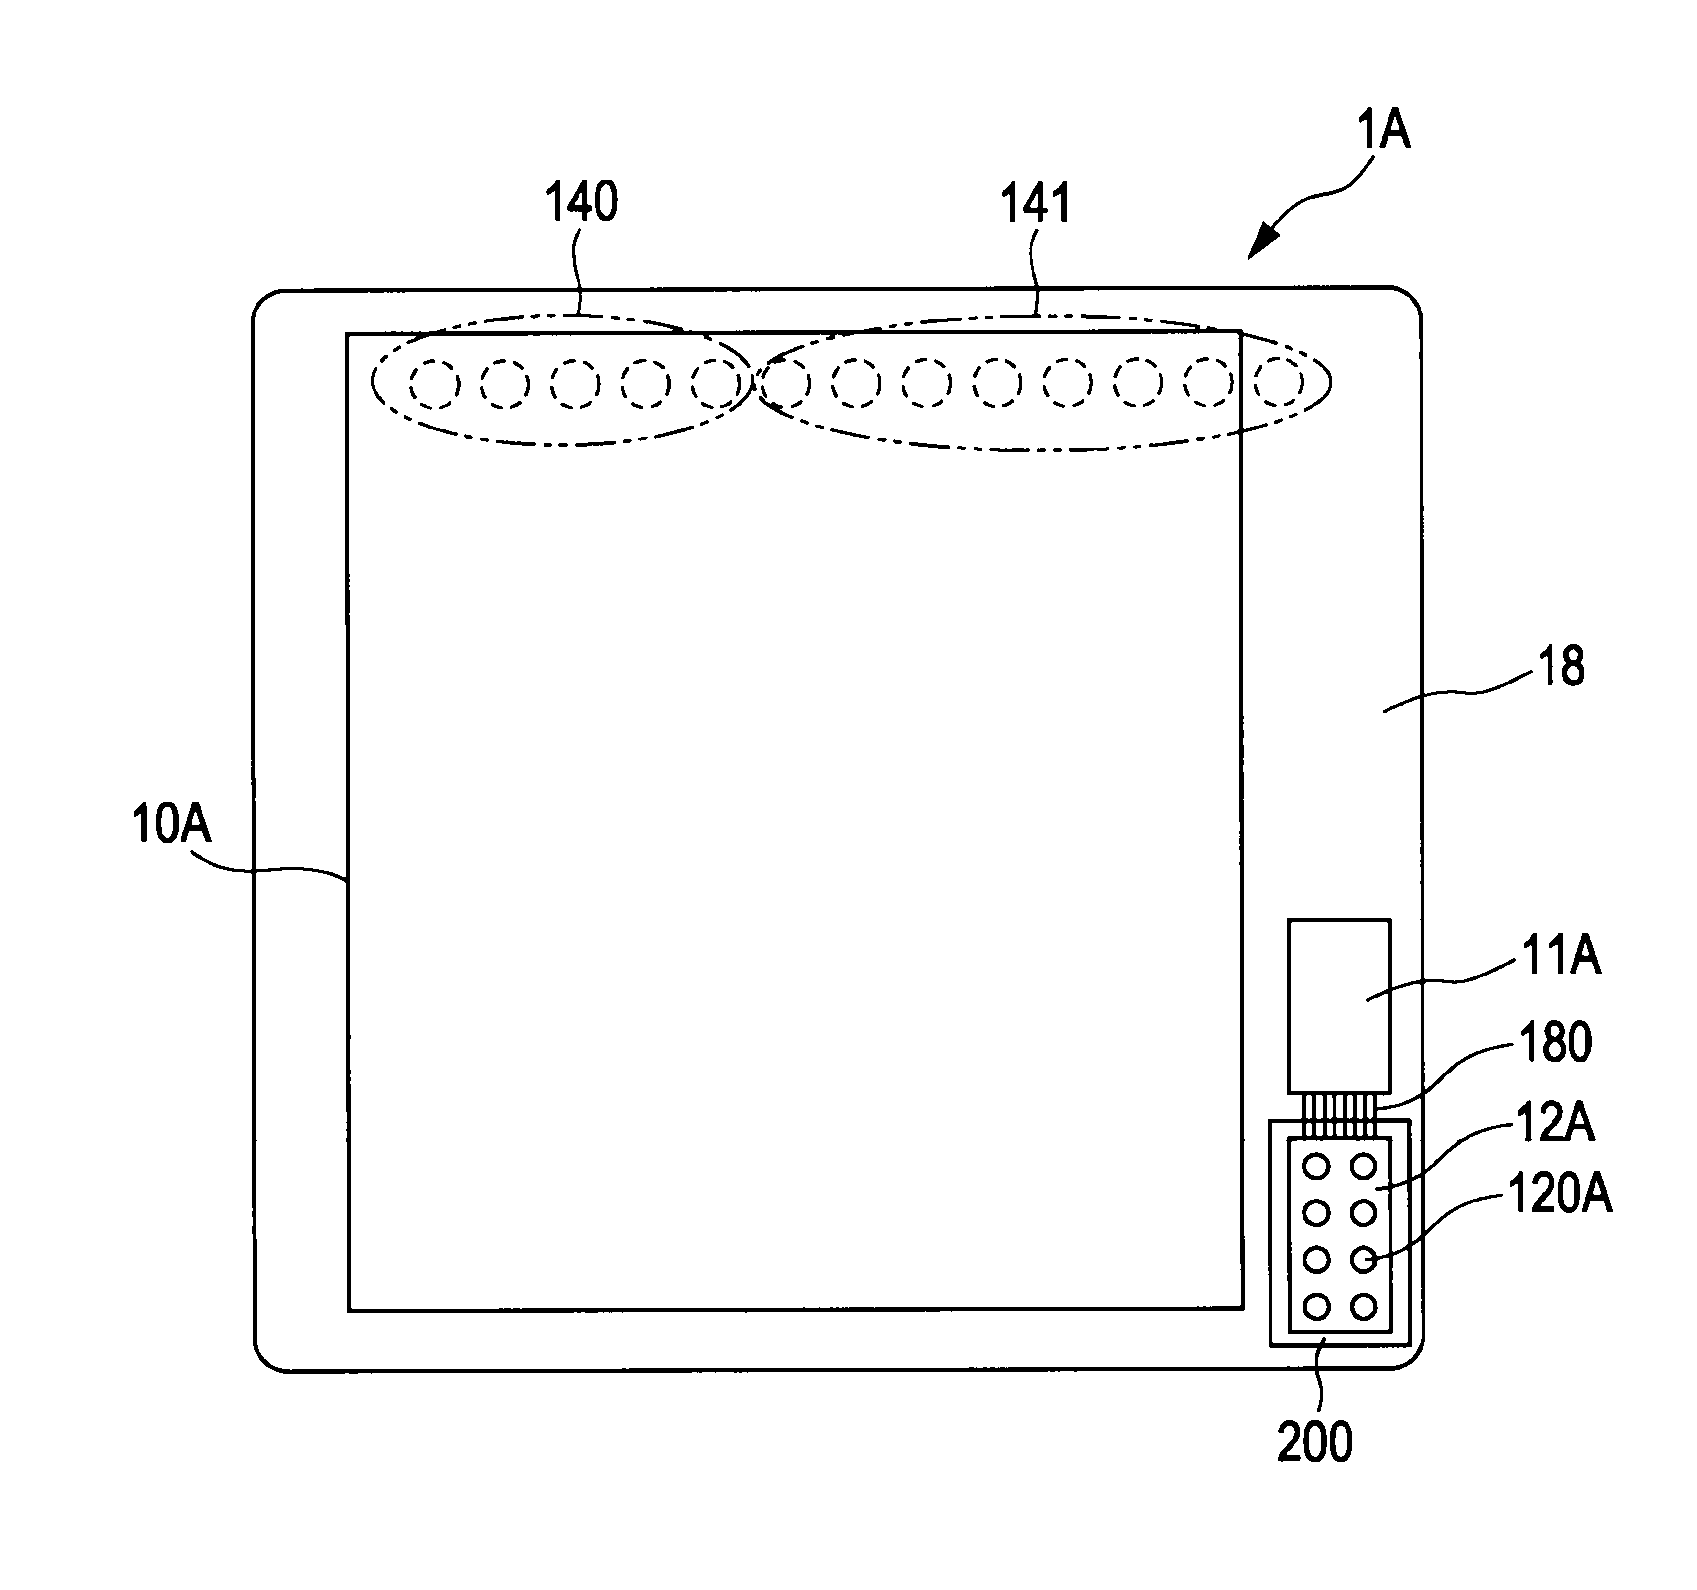 Solid-state imaging device and signal processing system